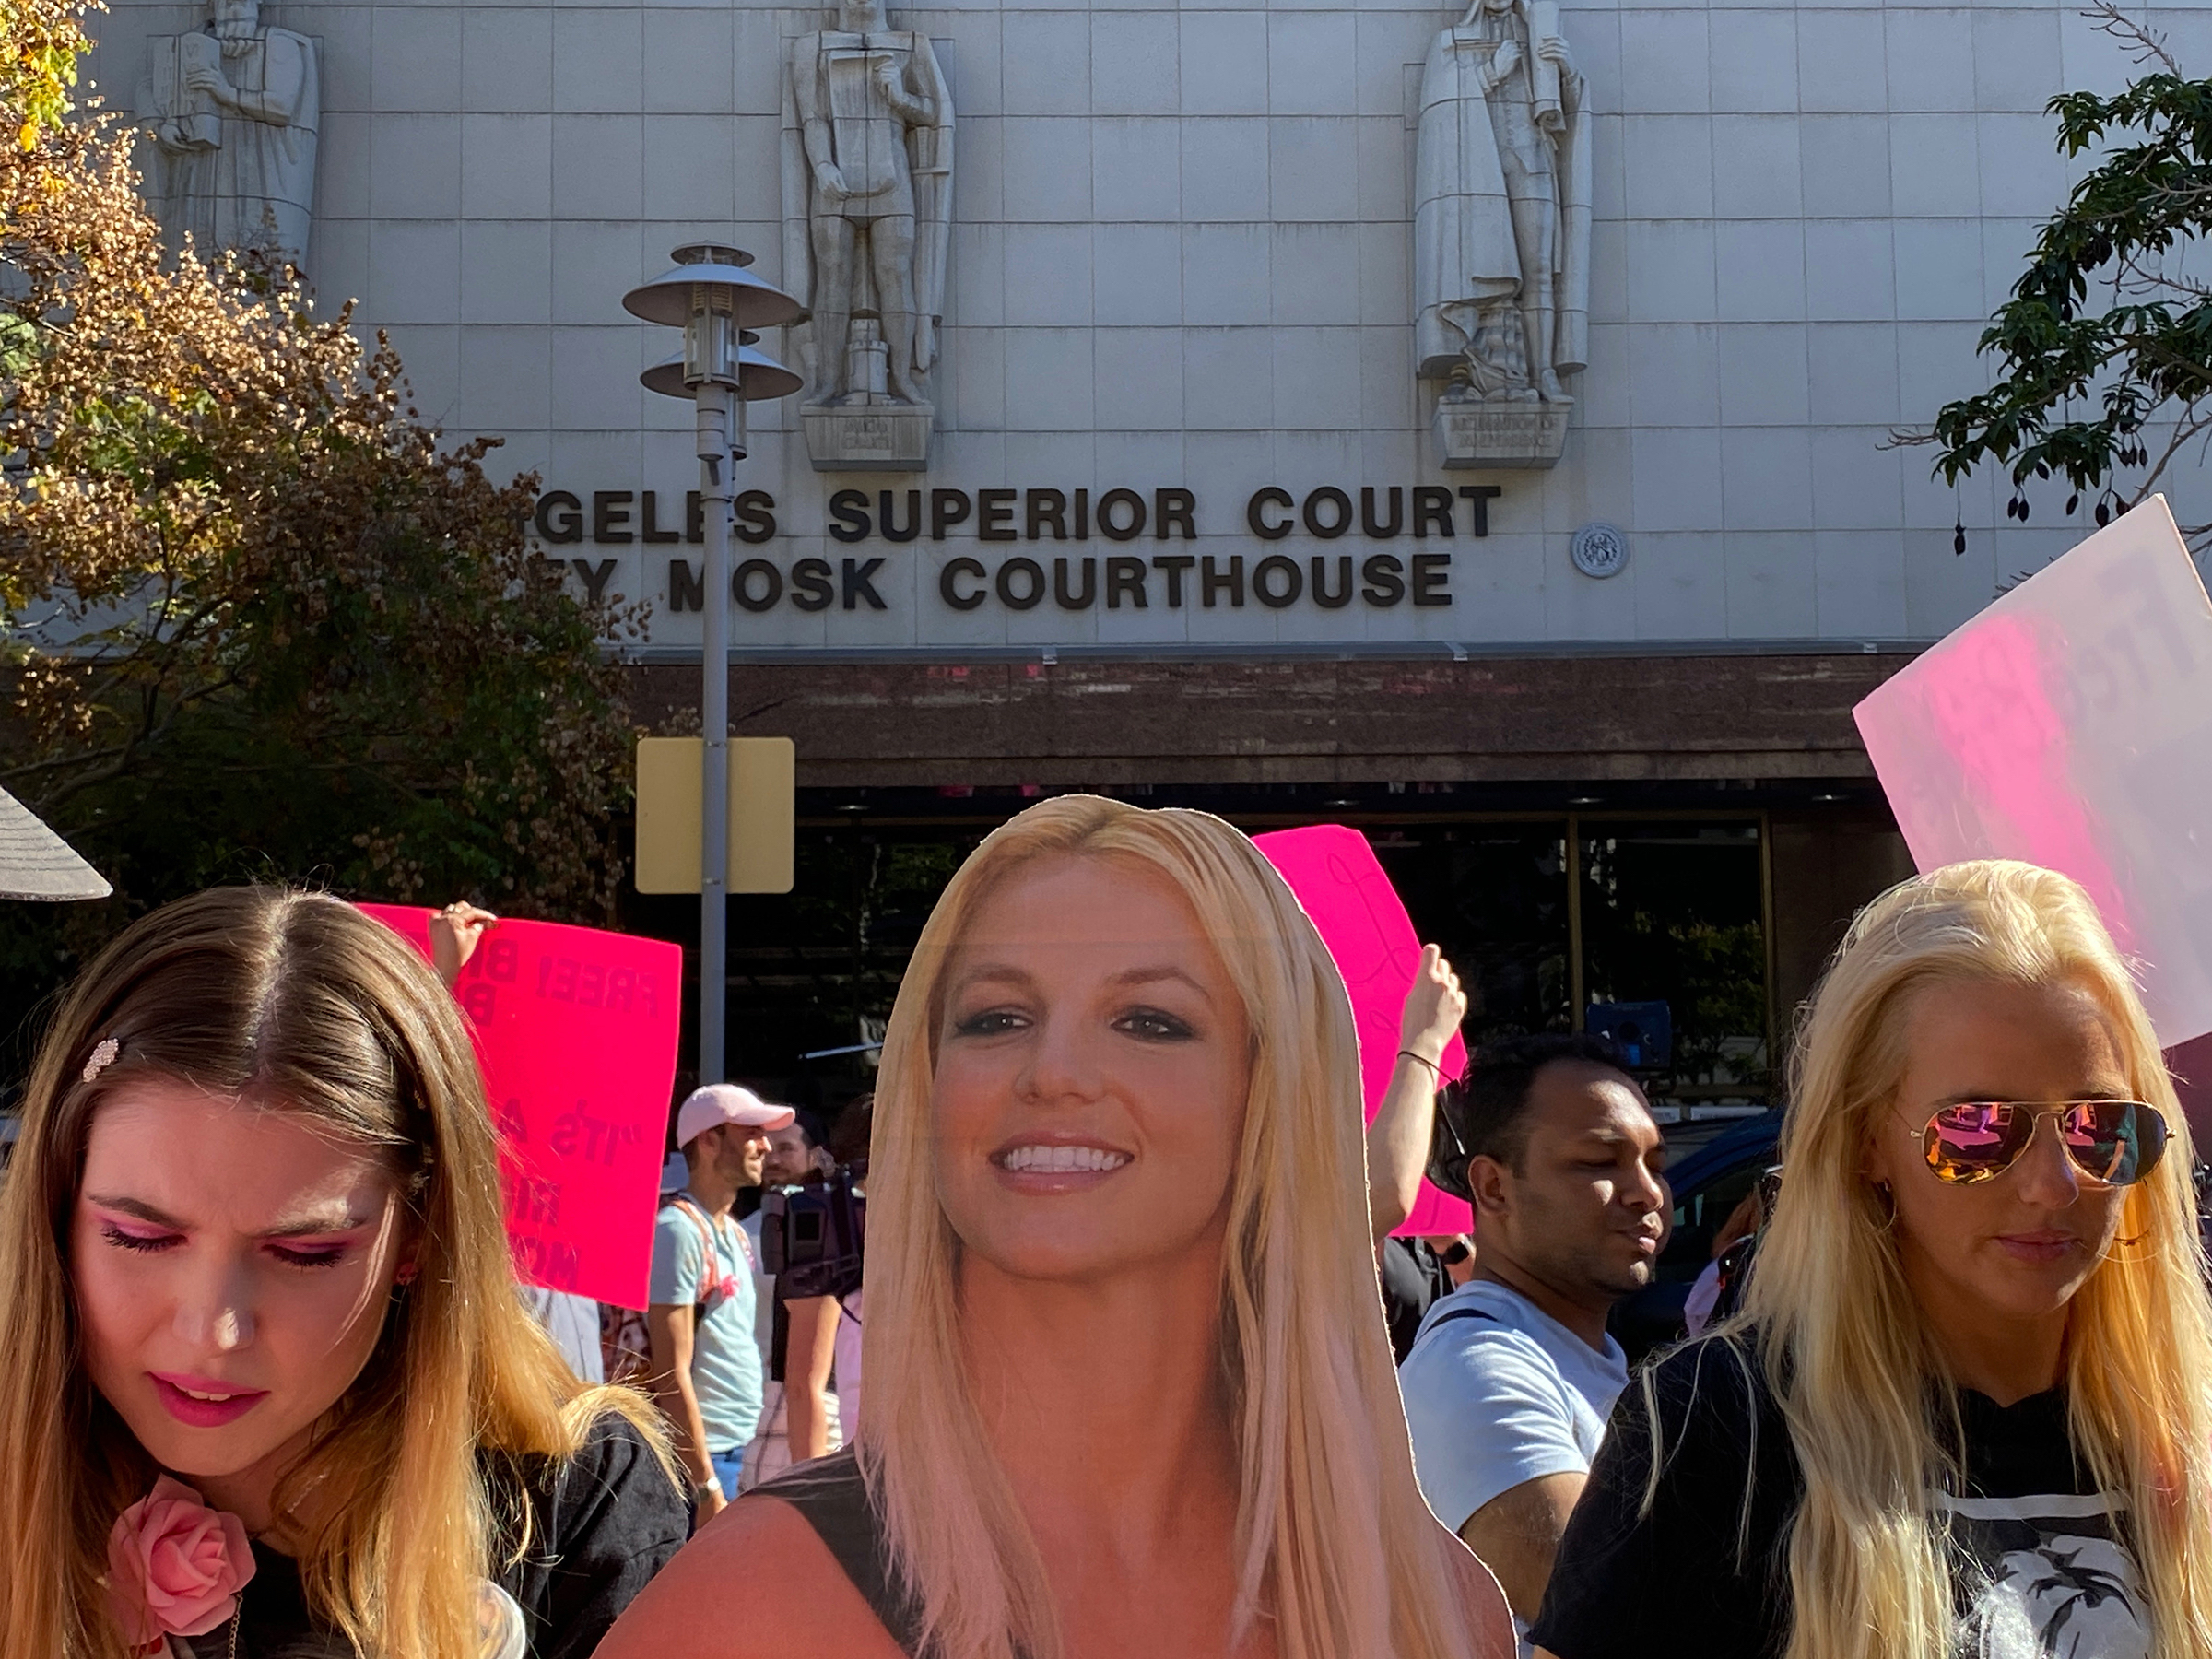 Supporters of Britney Spears gather outside an L.A. courthouse on Nov. 12 where a judge that day ended the conservatorship that denied her control of her health and finances for 13 years.